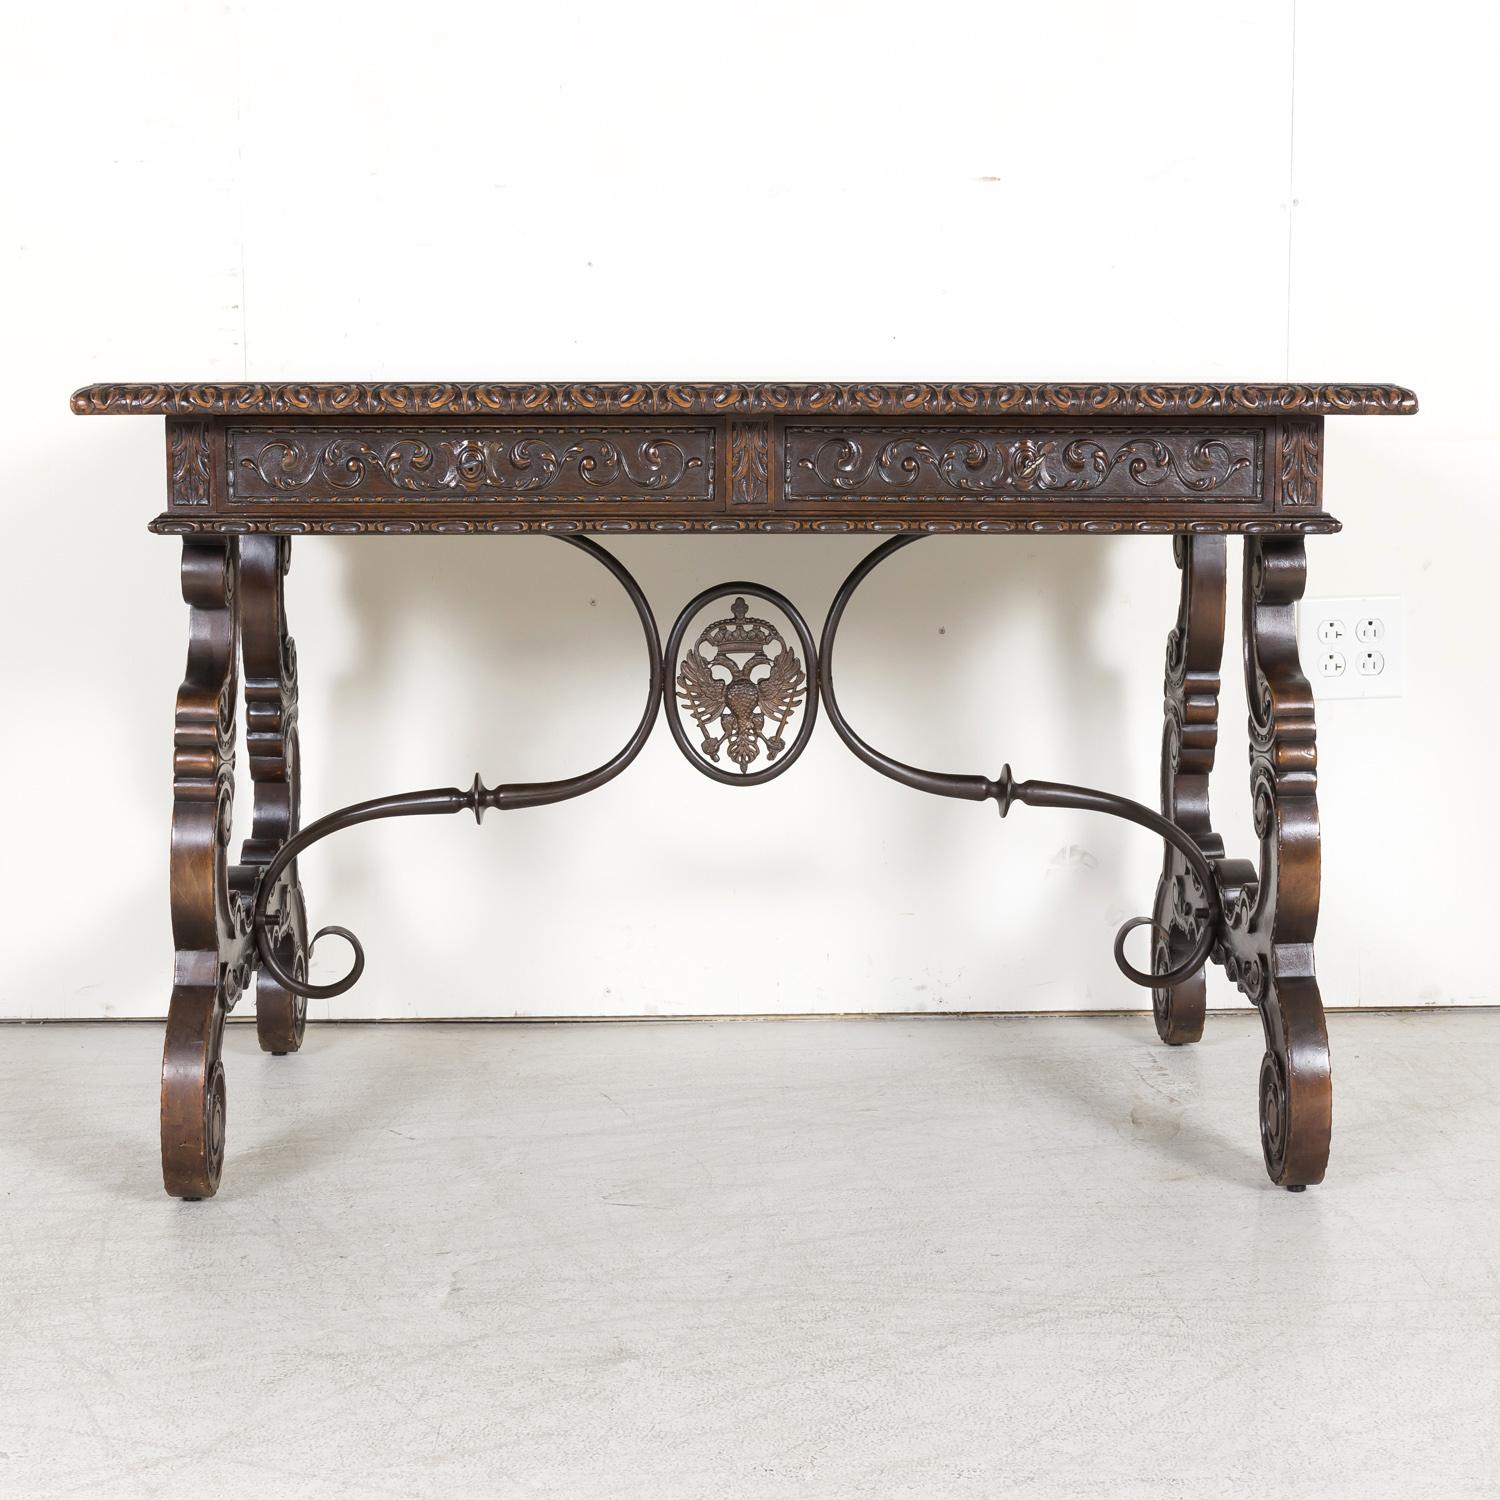 19th Century Spanish Baroque Style Walnut Lyre Leg Writing Table or Side Table In Good Condition For Sale In Birmingham, AL